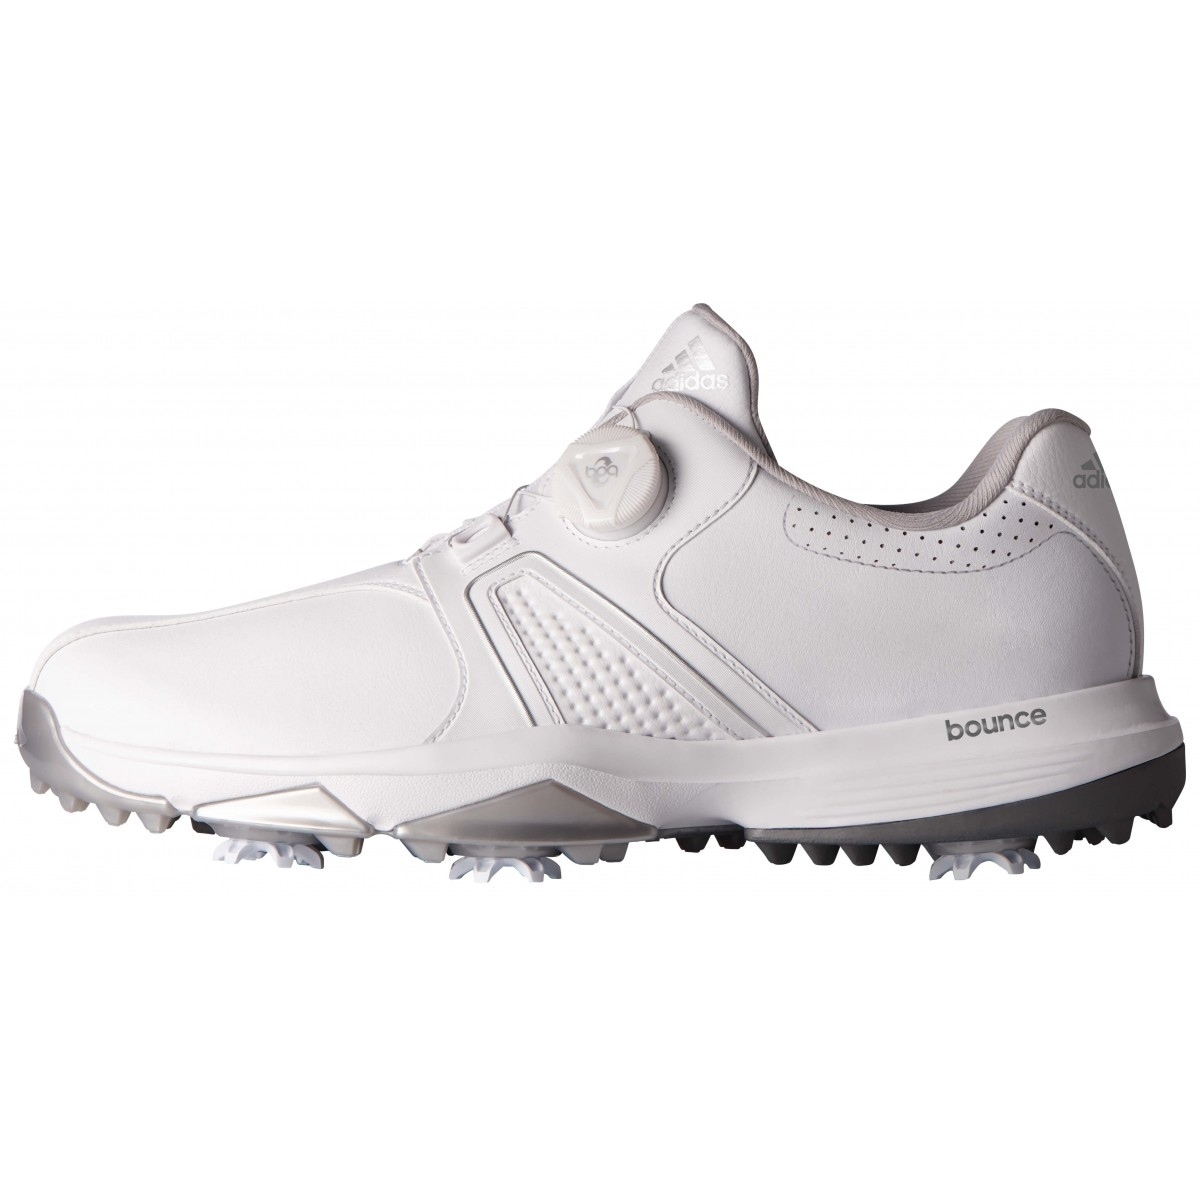 adidas 360 traxion boa golf shoes review